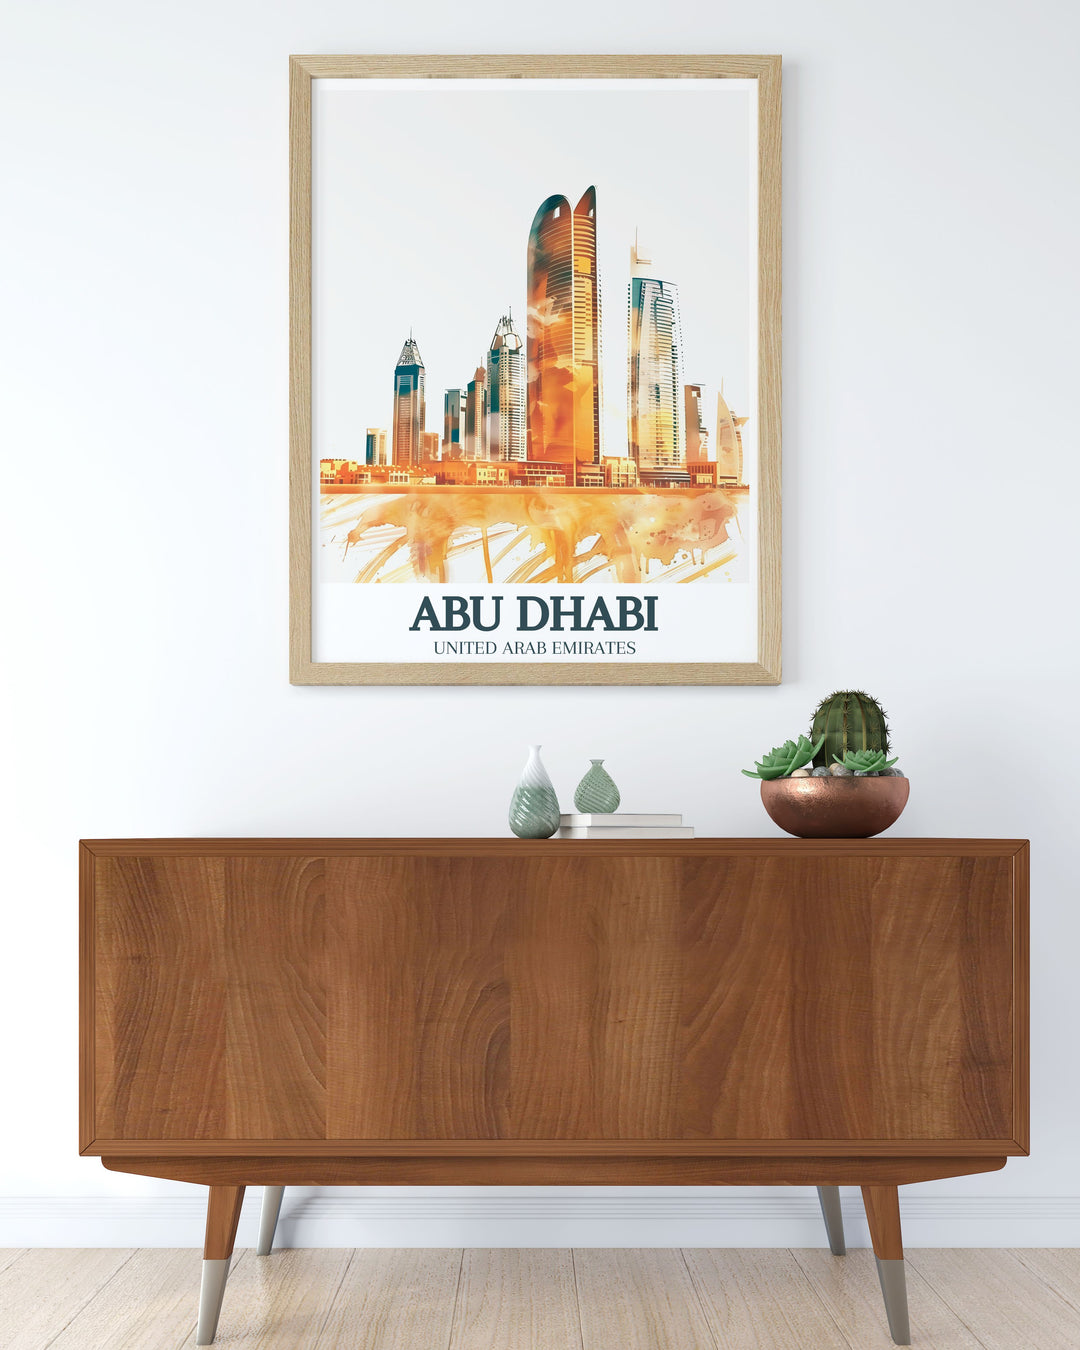 Unique artwork of the Burj Mohammed Bin Rashid in Abu Dhabi. This Emirates travel poster showcases the towers stunning design and is a great addition to any art collection. Perfect as a gift for those who appreciate modern architecture.